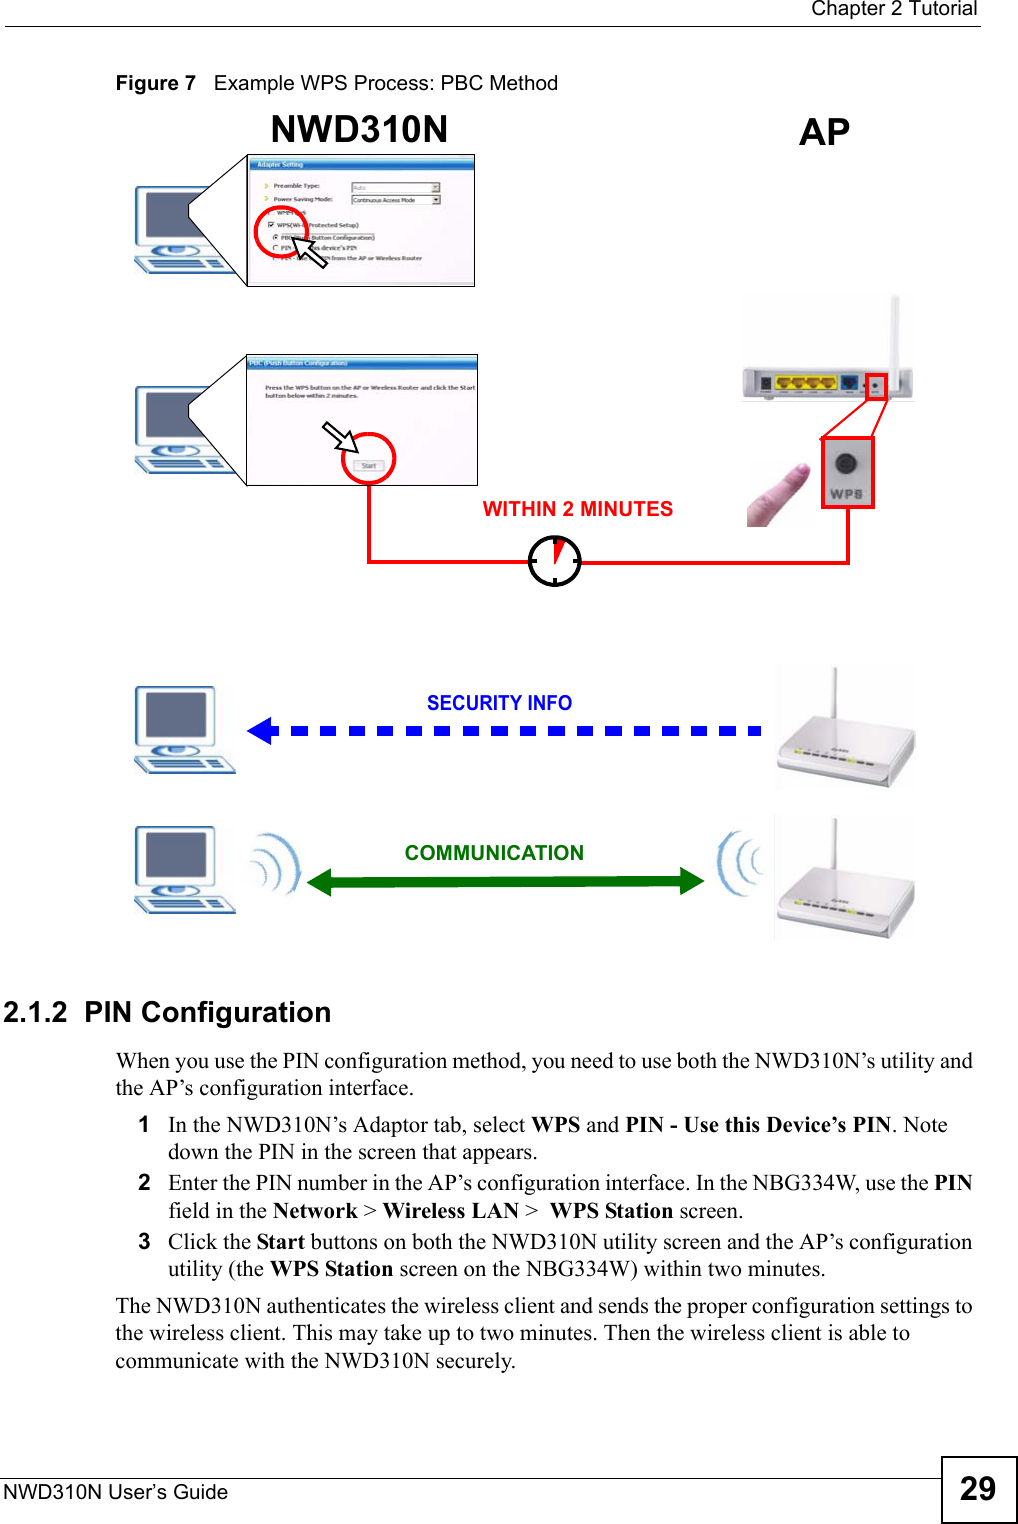  Chapter 2 TutorialNWD310N User’s Guide 29Figure 7   Example WPS Process: PBC Method2.1.2  PIN ConfigurationWhen you use the PIN configuration method, you need to use both the NWD310N’s utility and the AP’s configuration interface.1In the NWD310N’s Adaptor tab, select WPS and PIN - Use this Device’s PIN. Note down the PIN in the screen that appears. 2Enter the PIN number in the AP’s configuration interface. In the NBG334W, use the PIN field in the Network &gt; Wireless LAN &gt;  WPS Station screen. 3Click the Start buttons on both the NWD310N utility screen and the AP’s configuration utility (the WPS Station screen on the NBG334W) within two minutes. The NWD310N authenticates the wireless client and sends the proper configuration settings to the wireless client. This may take up to two minutes. Then the wireless client is able to communicate with the NWD310N securely. NWD310N APSECURITY INFOCOMMUNICATIONWITHIN 2 MINUTES